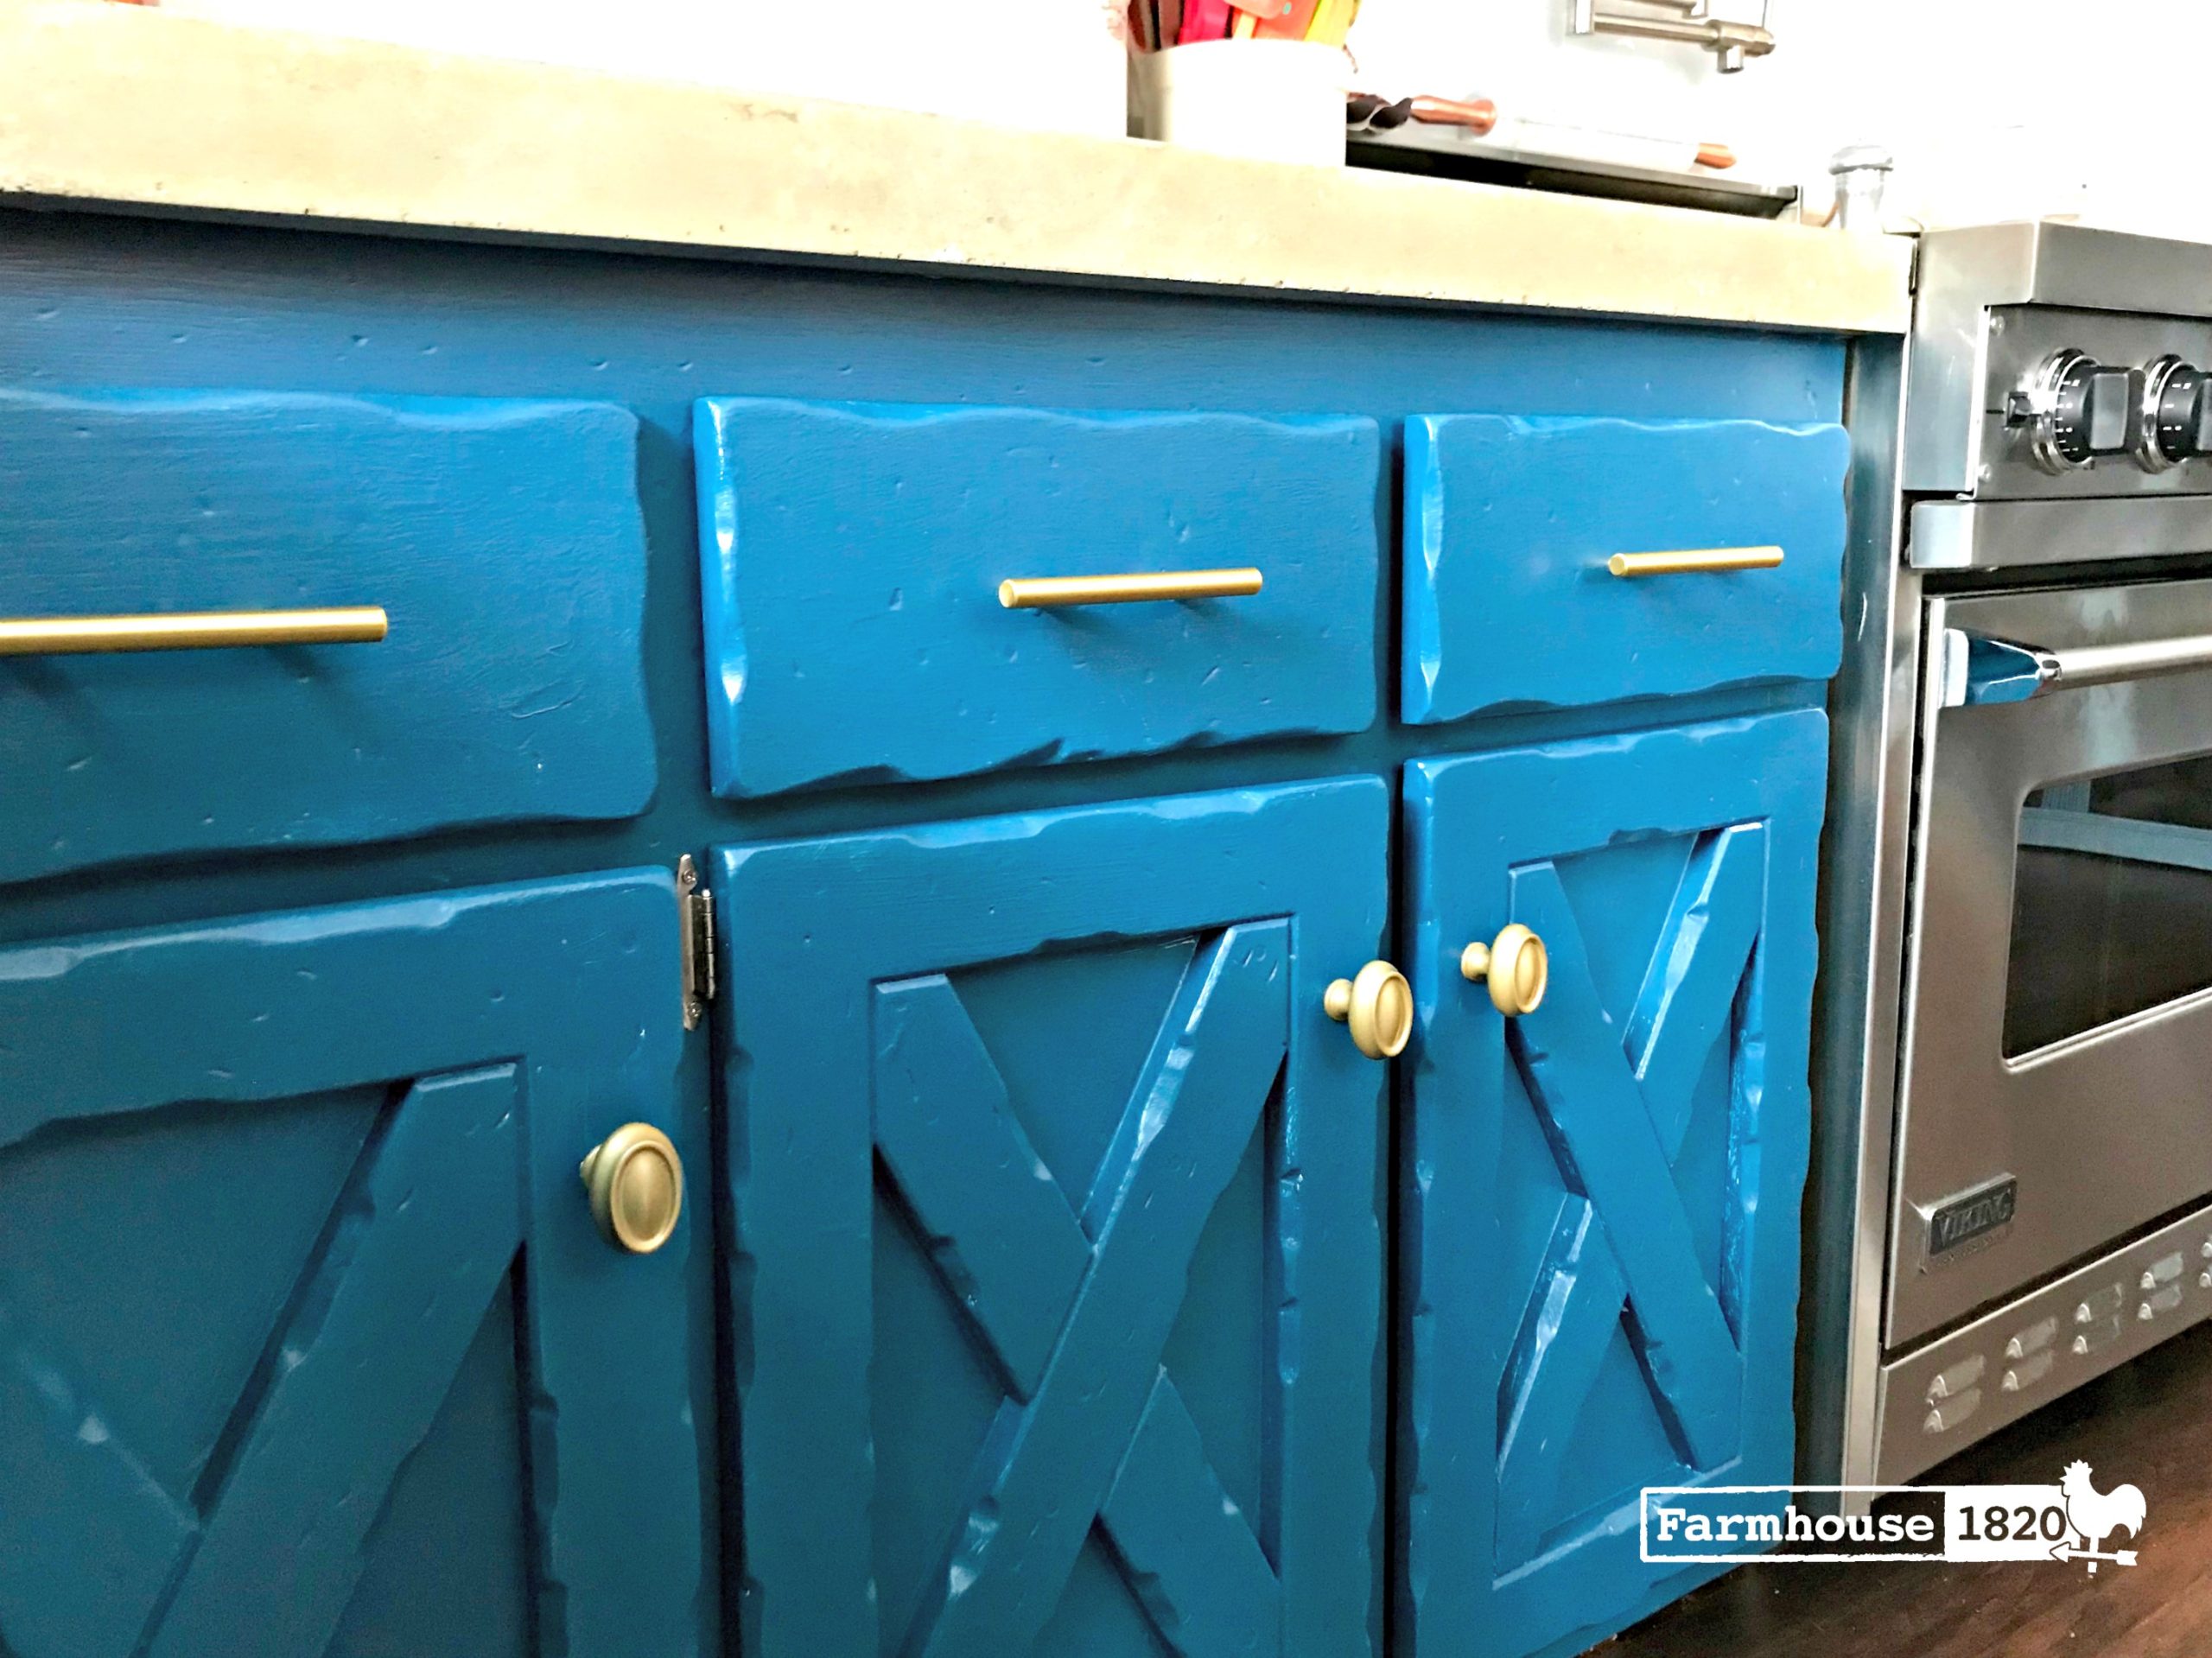 Kitchen cabinets - painting them blue with brass hardware